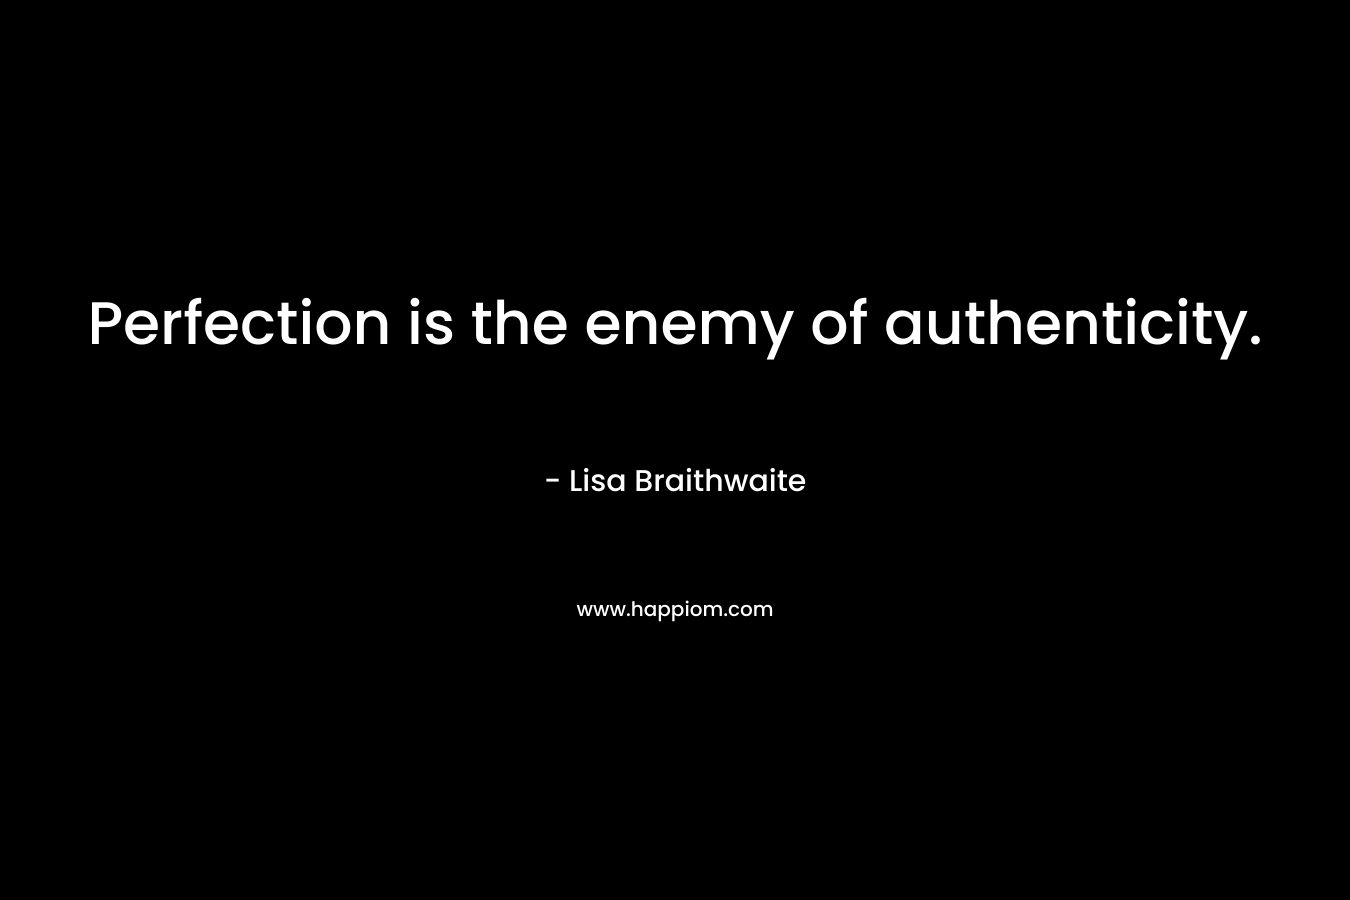 Perfection is the enemy of authenticity.